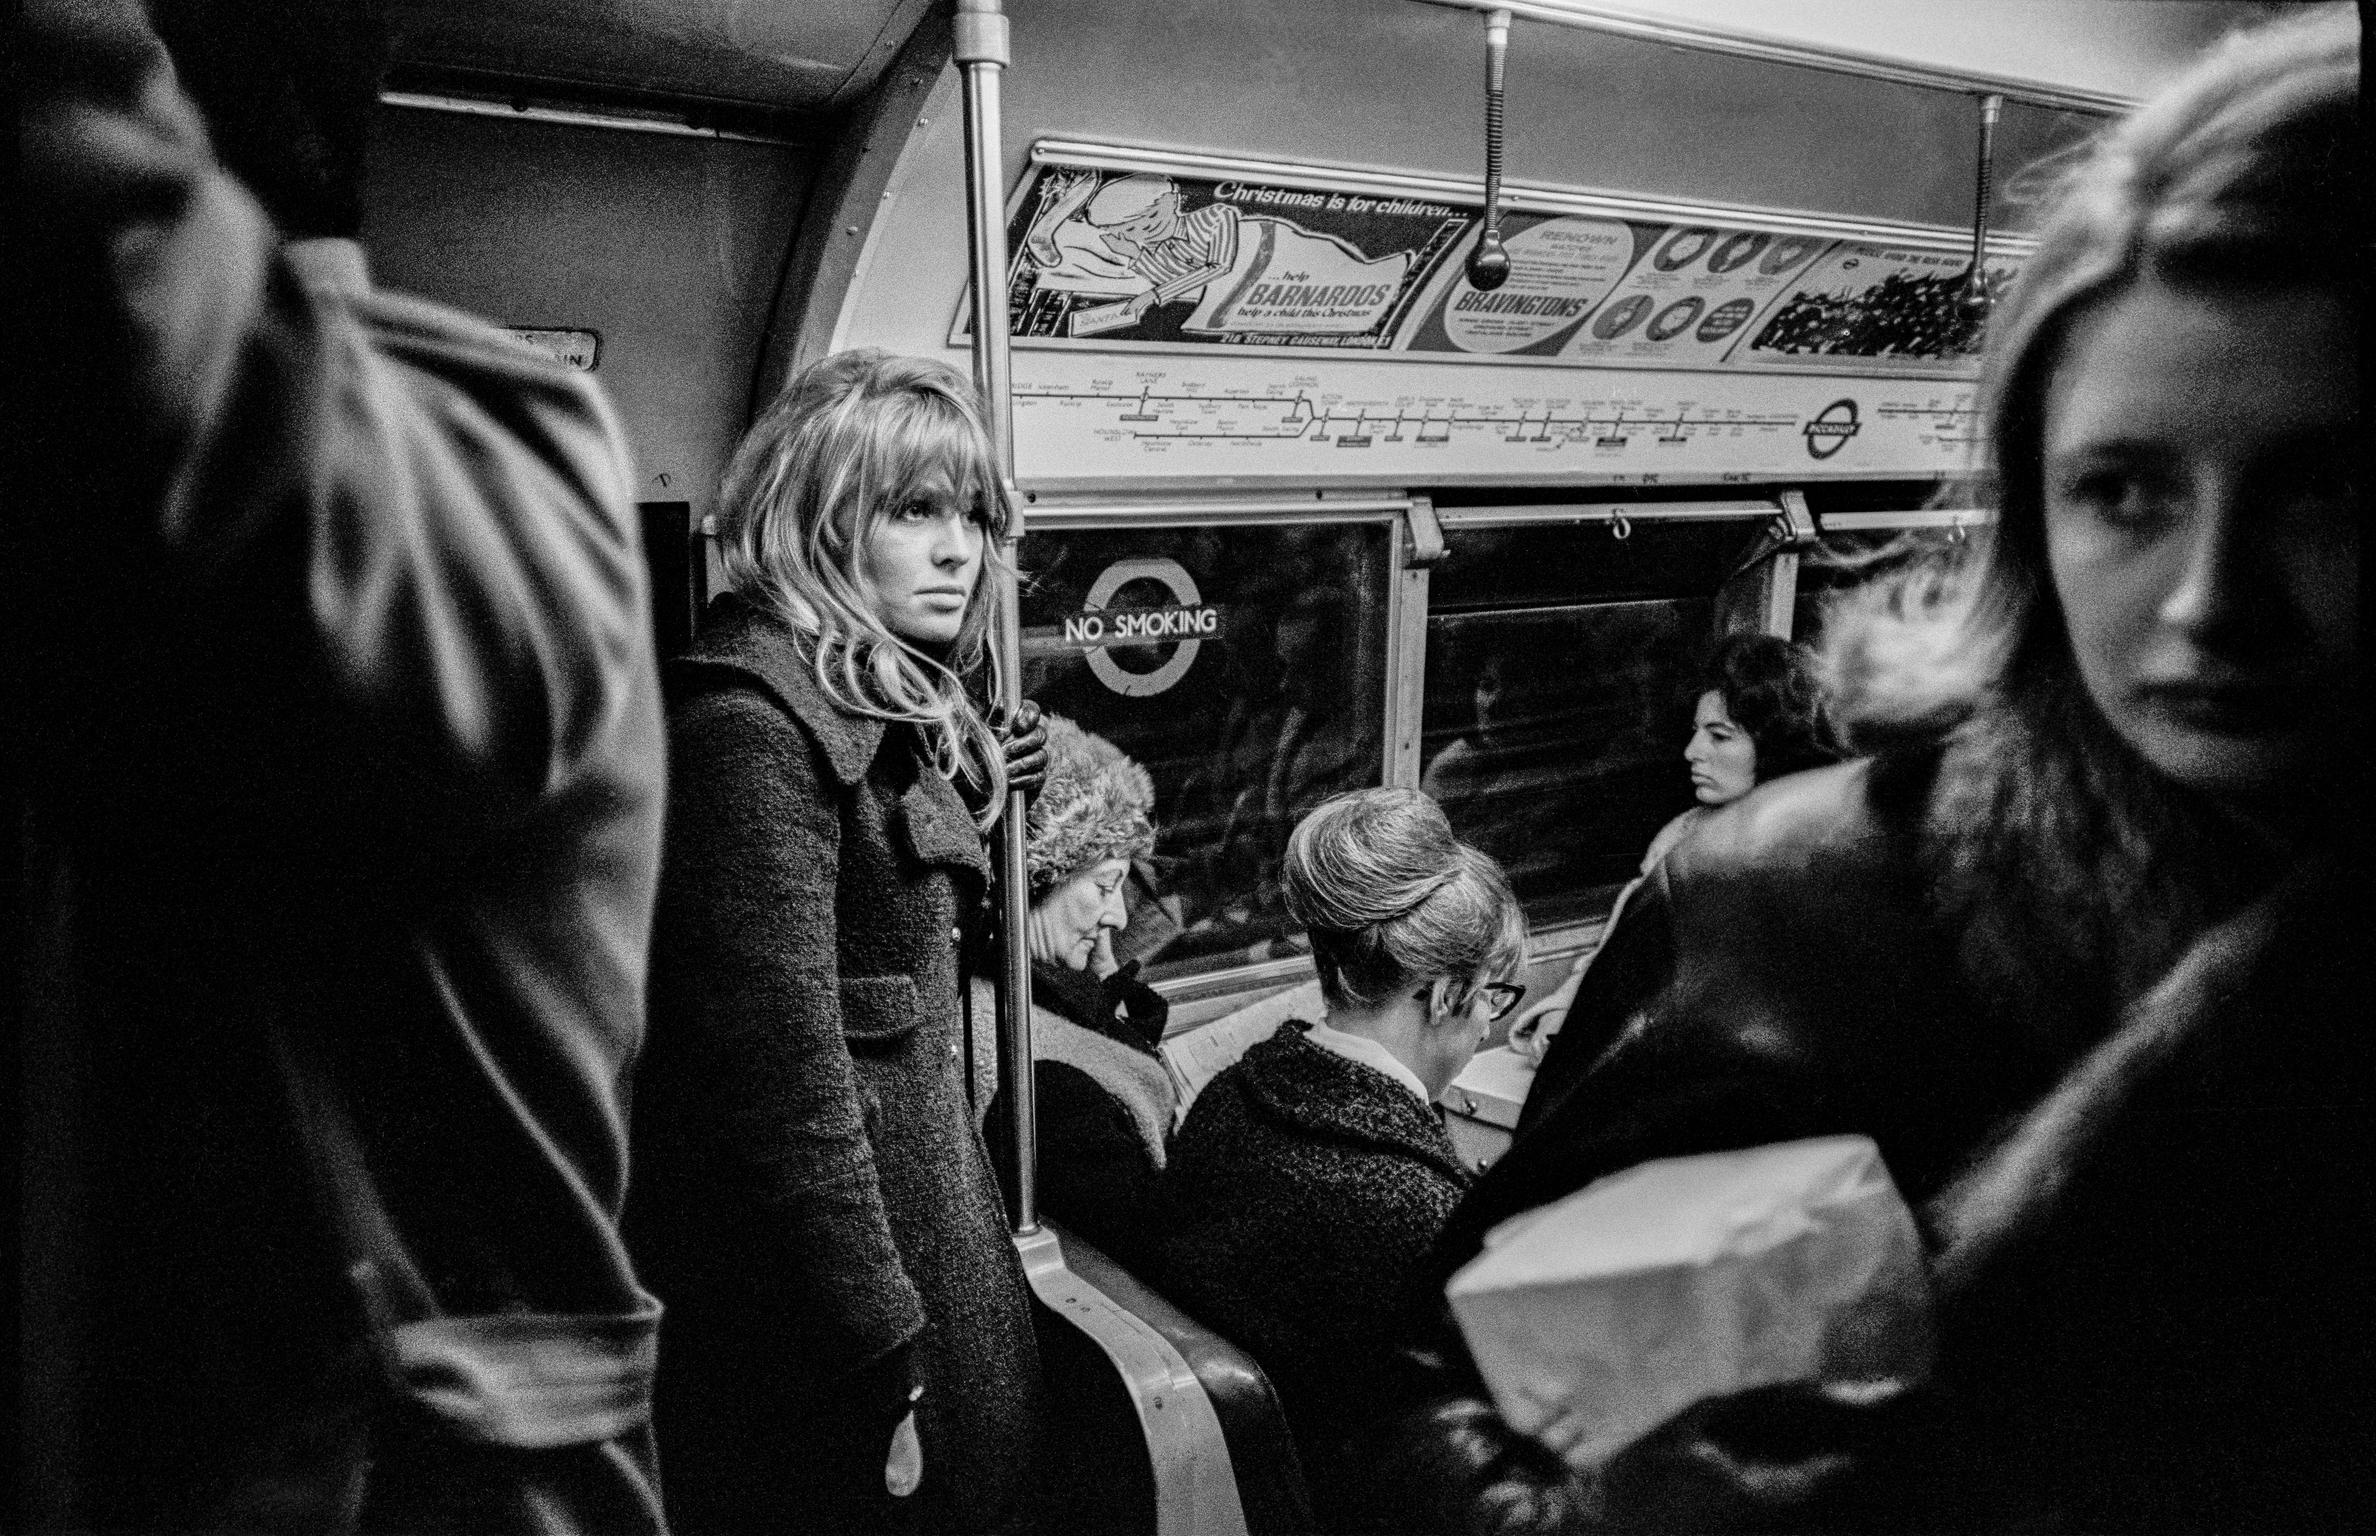 Actress Julie Christie travelling in London on the underground